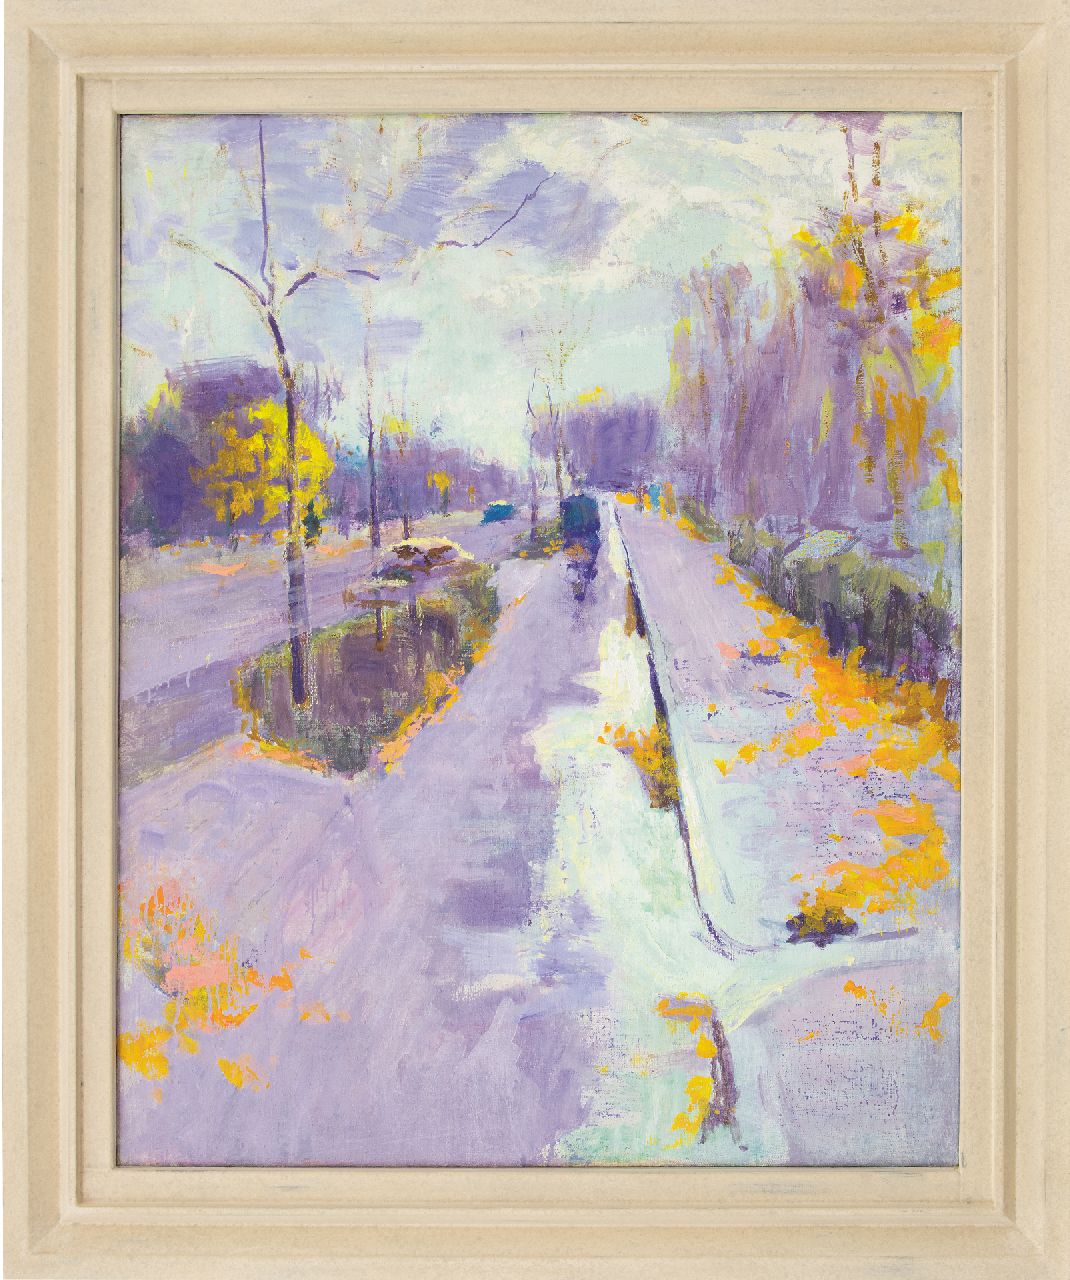 Altink J.  | Jan Altink | Paintings offered for sale | Cyclist on the Hereweg in Groningen, oil on canvas 100.4 x 80.1 cm, painted end 1920's